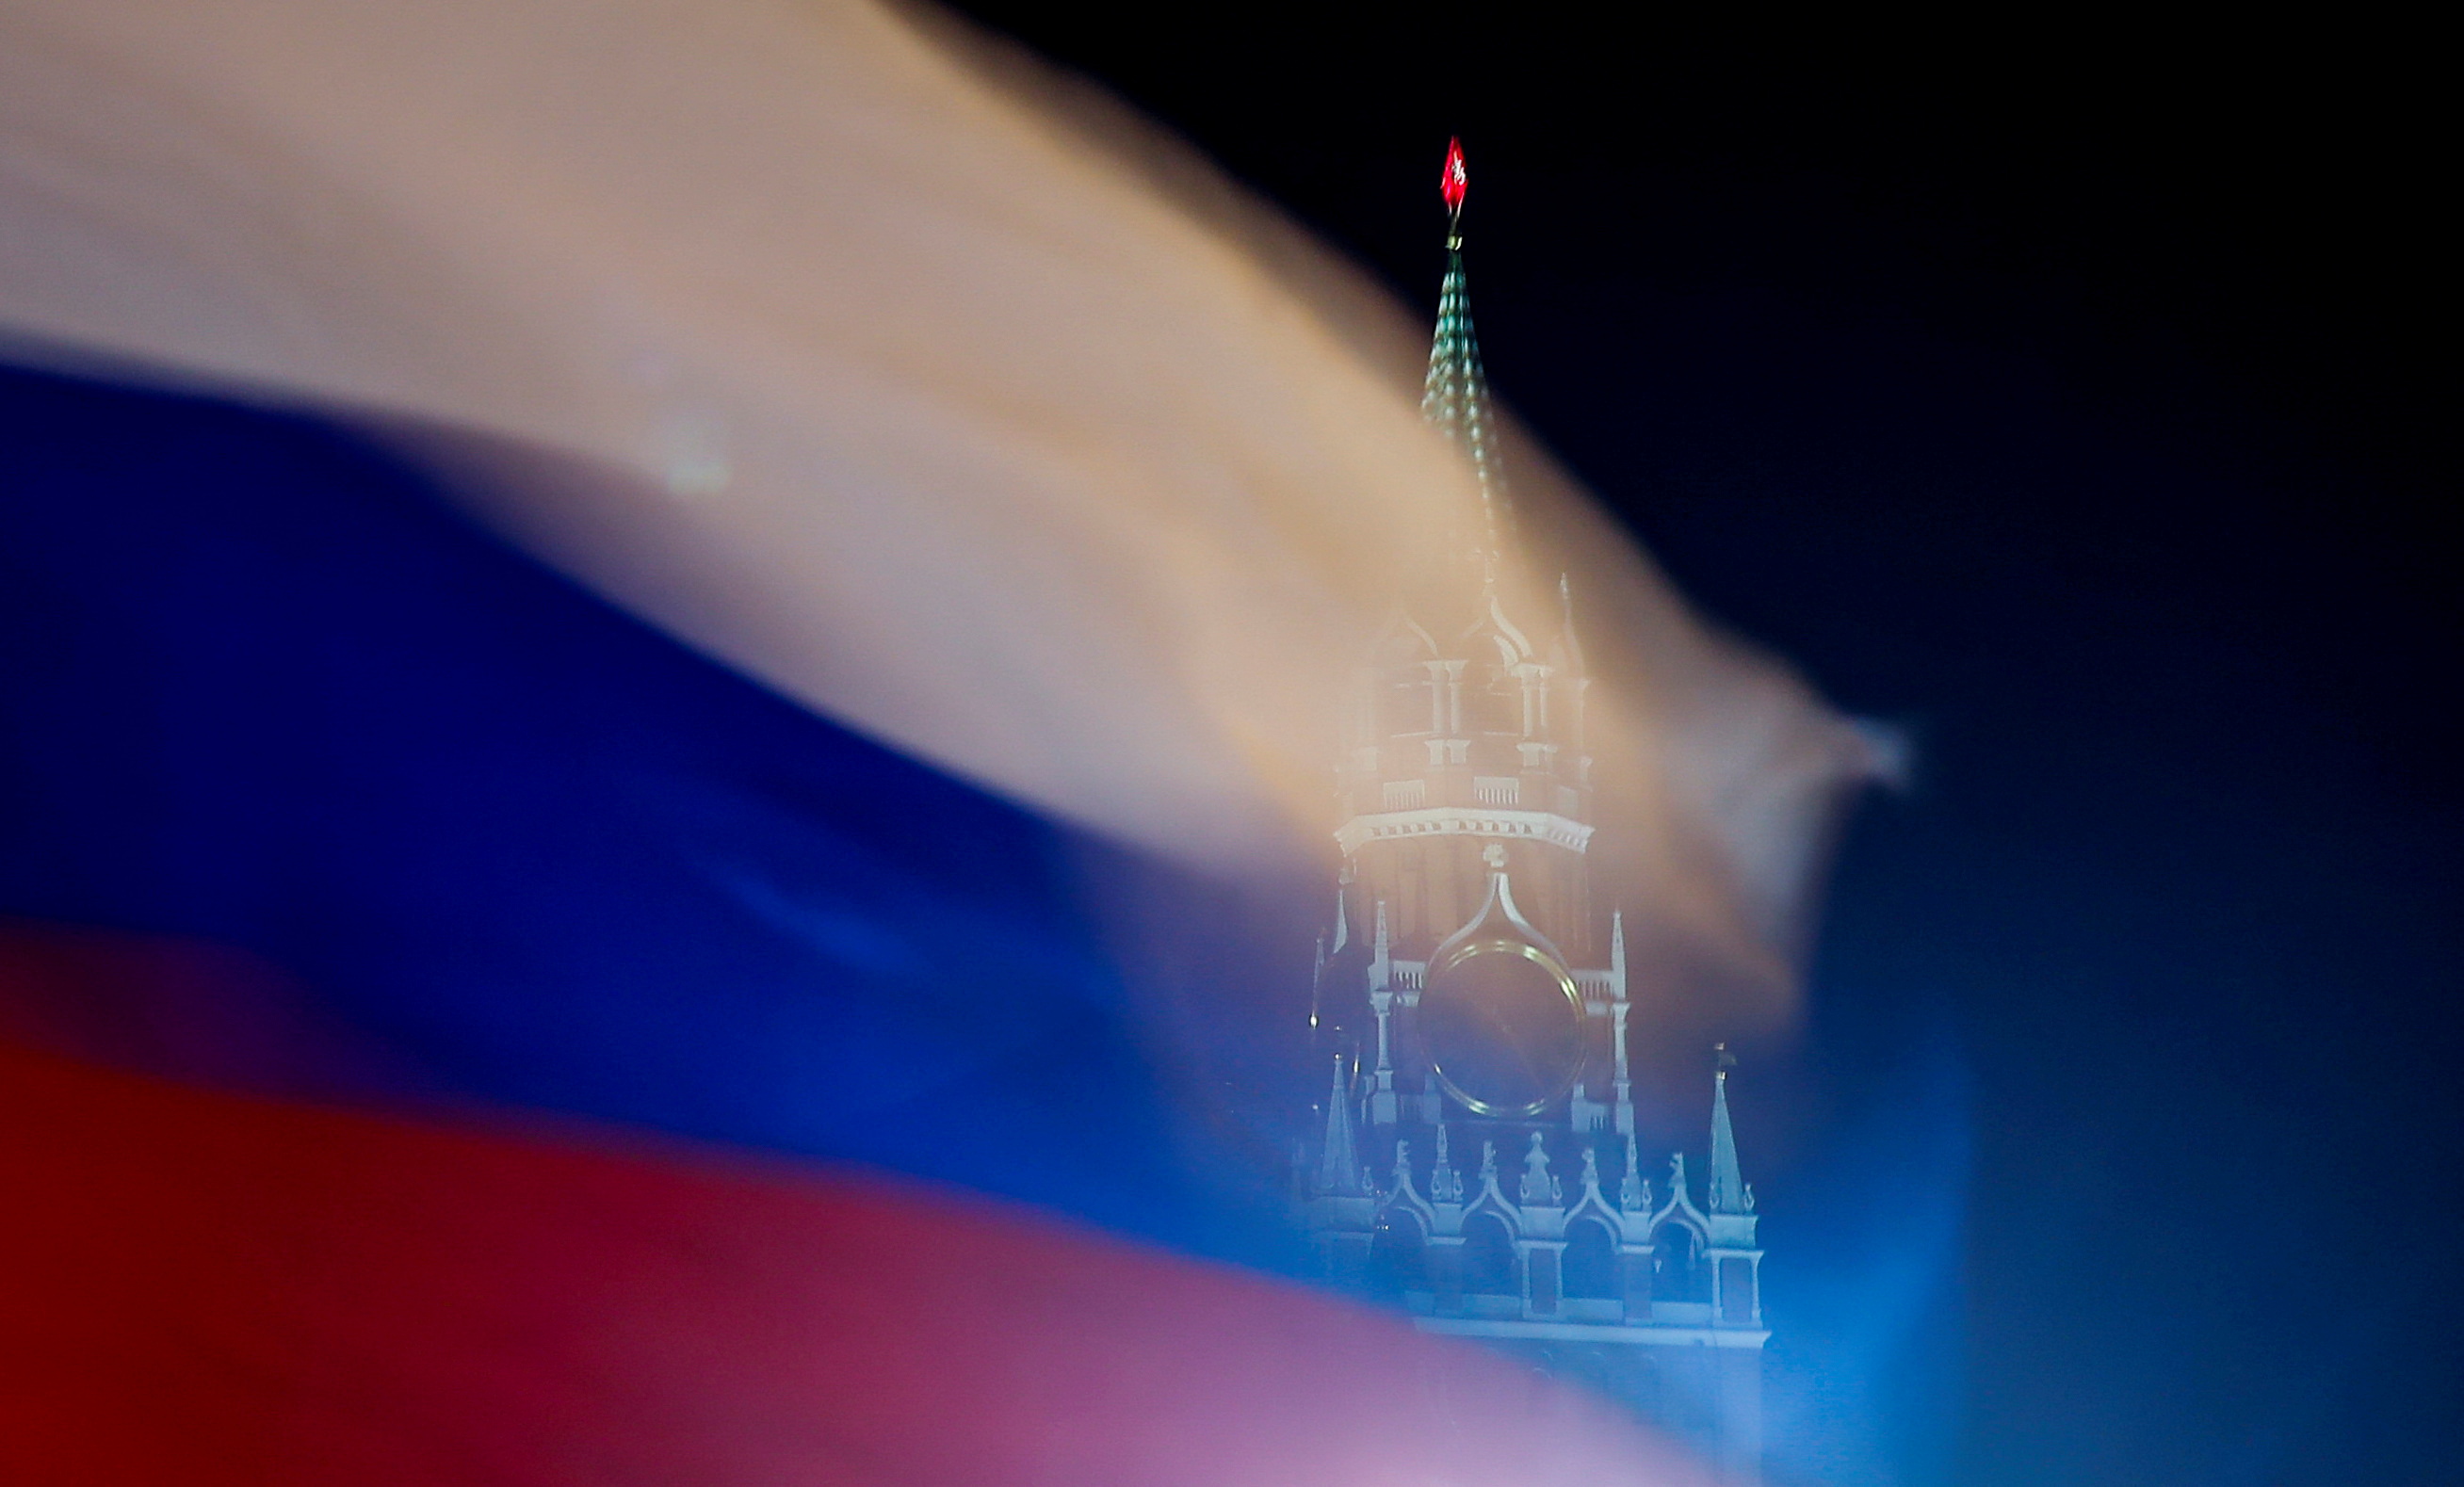 A Russian flag flies with the Spasskaya tower of Moscow's Kremlin in the background